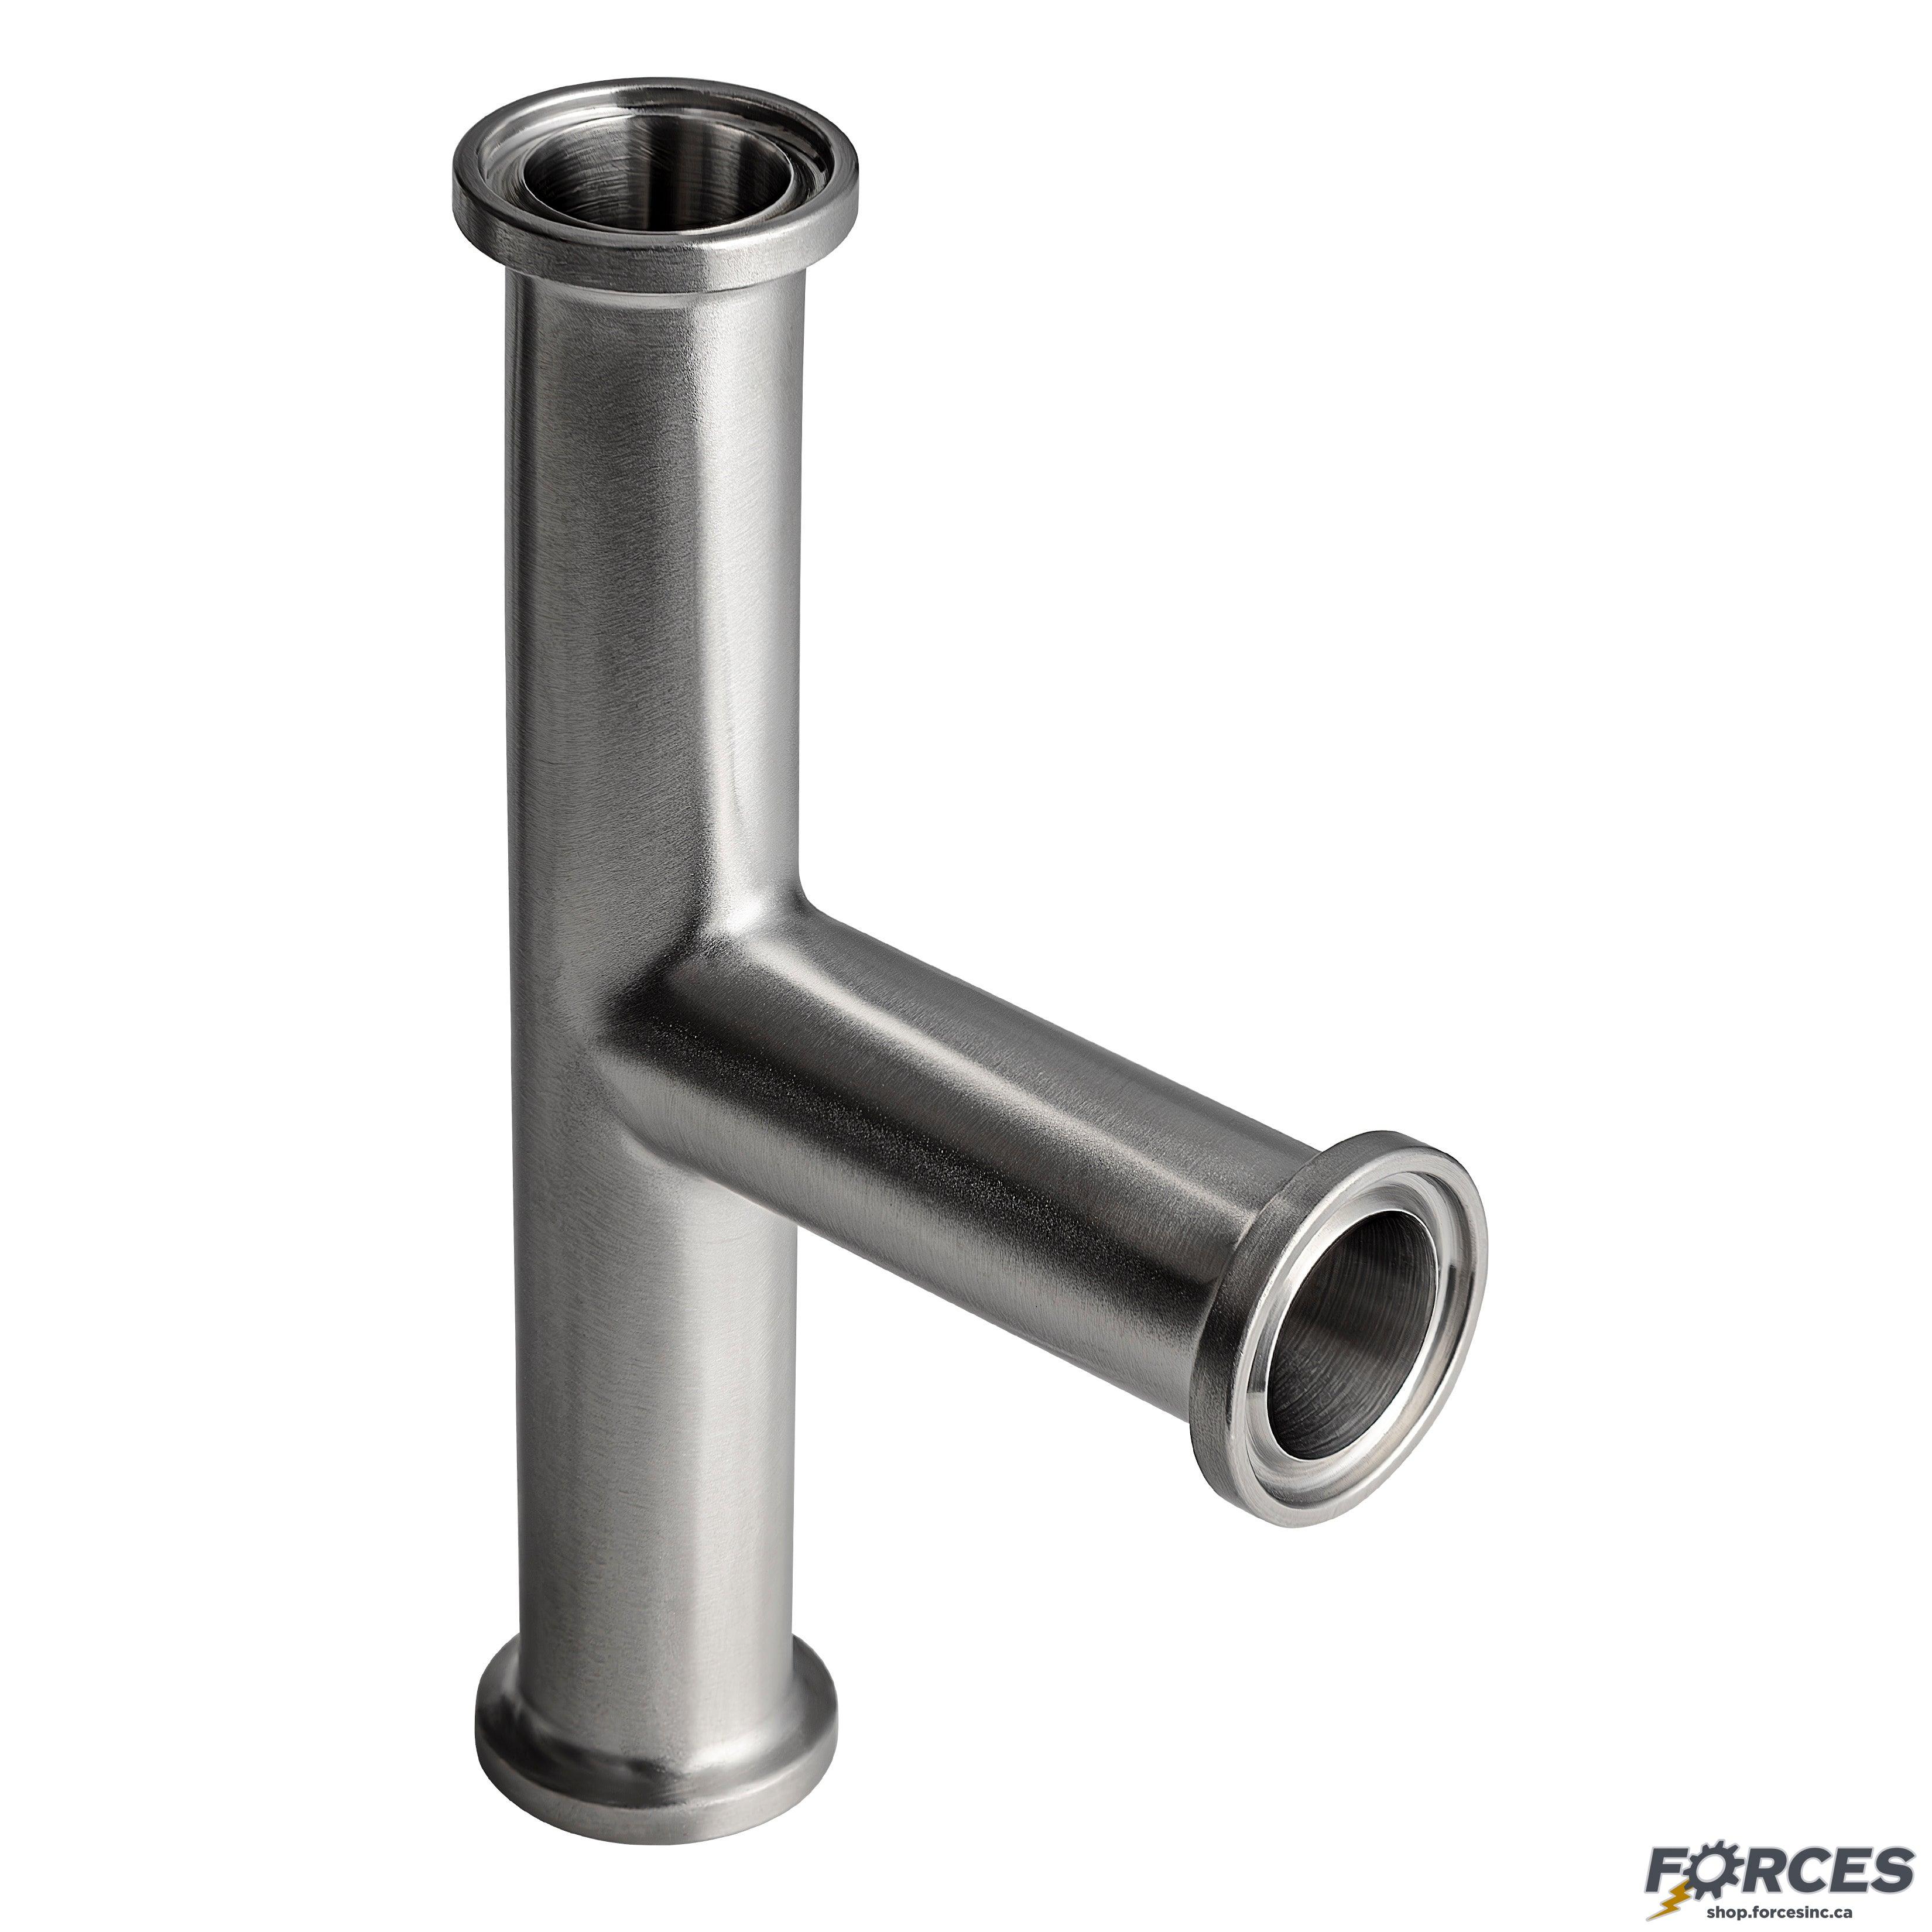 8" Tri-Clamp Tee - Stainless Steel 316 - Forces Inc